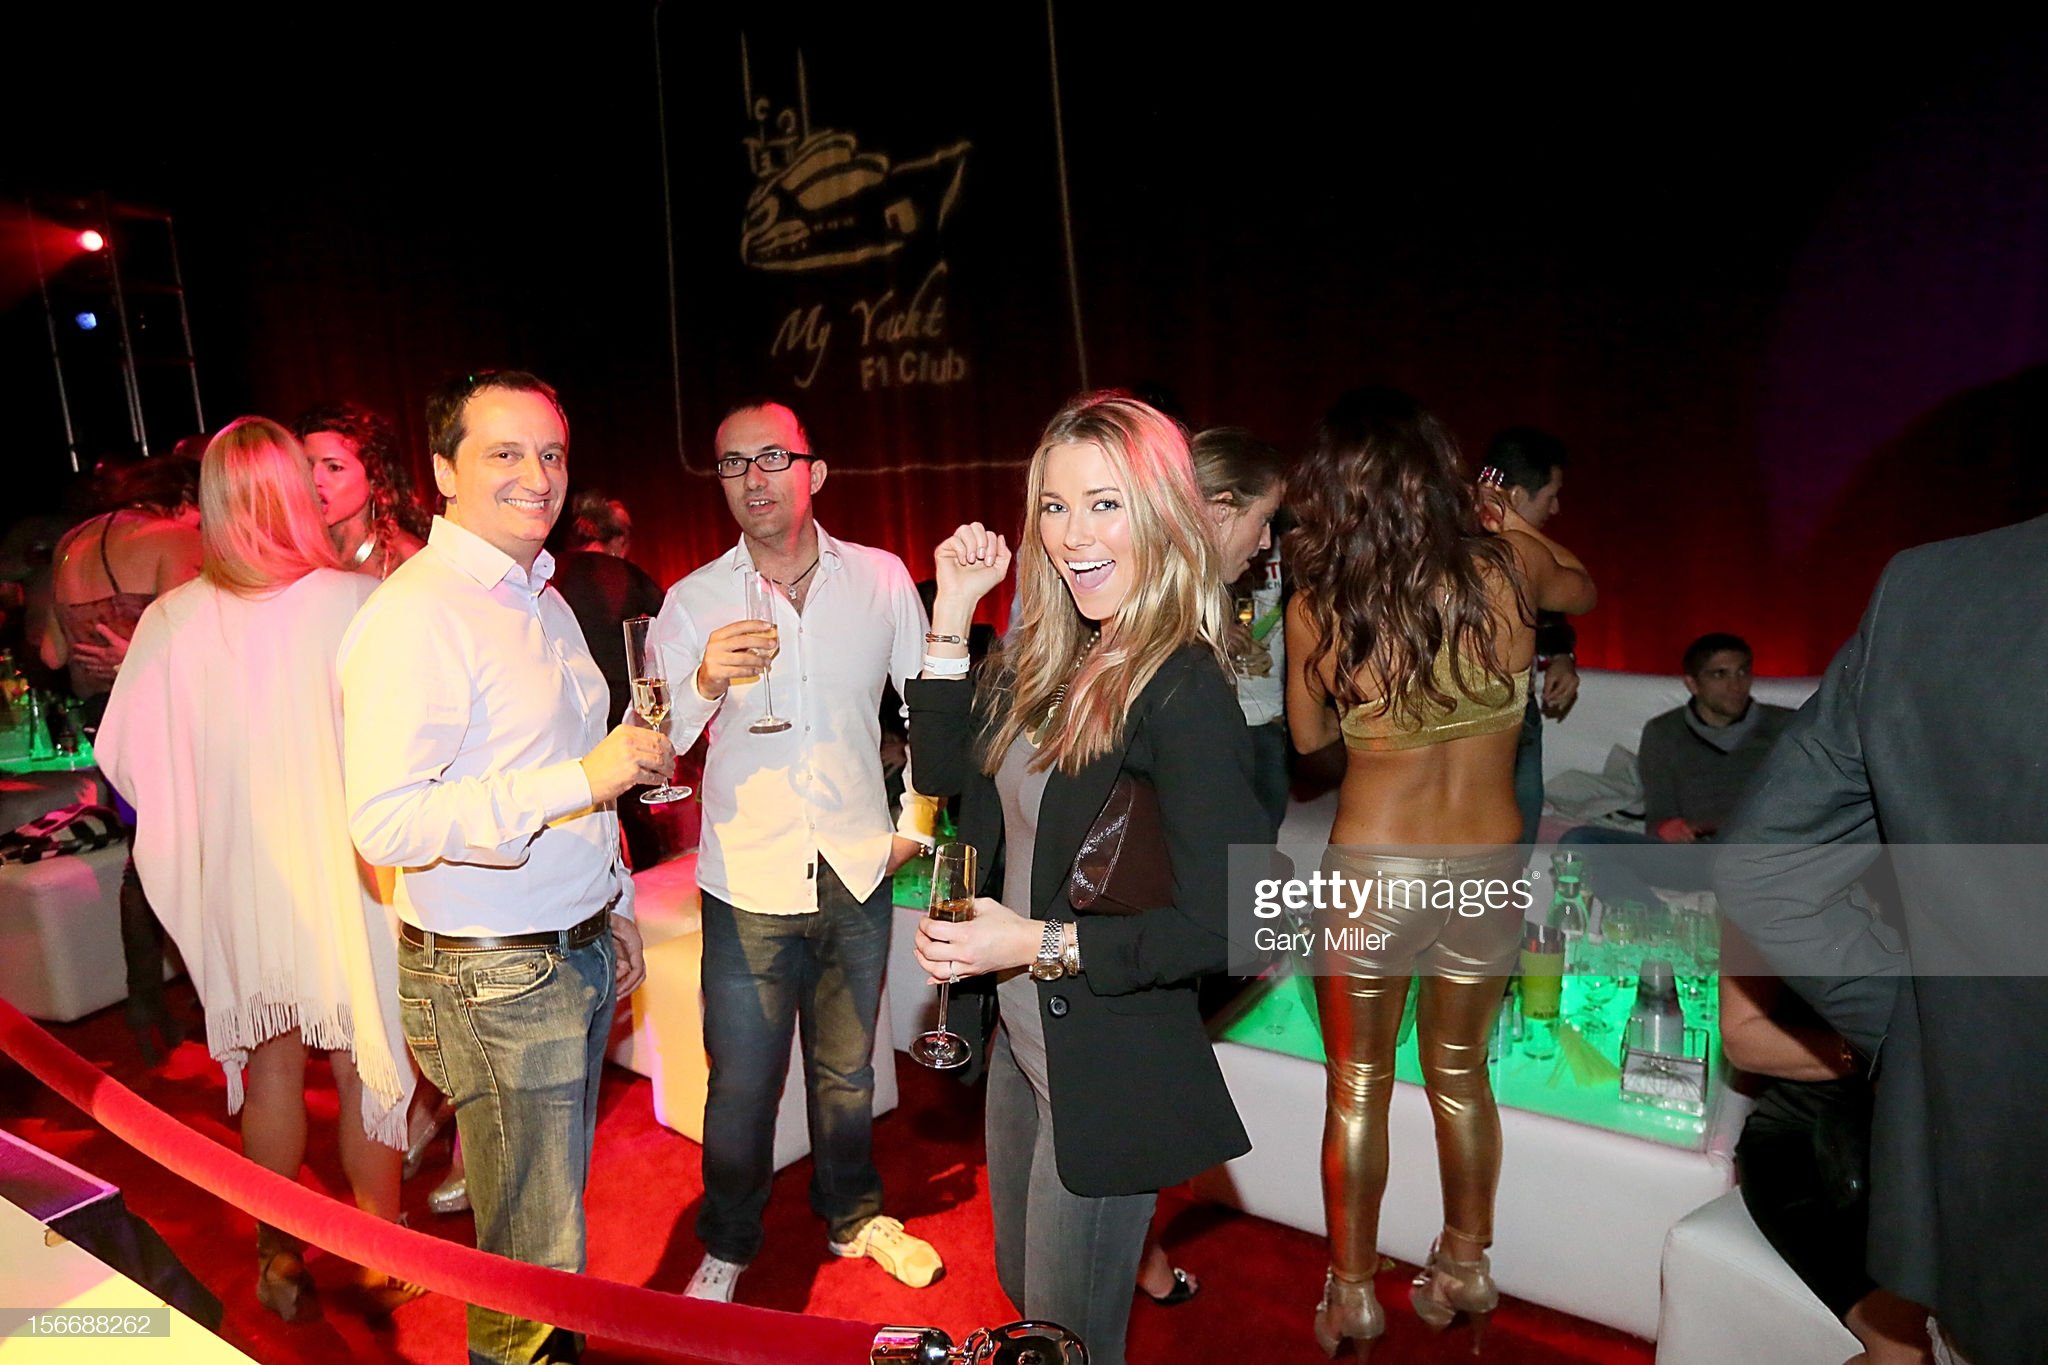 Actress Nicole Taylor, right, enjoys the V.I.P. room of the My Yacht F1 Club event sponsored by Patron Spirits, Lamborghini North America and Comte De Mazeray at Ballet Austin in Texas on 18 November 2012. 